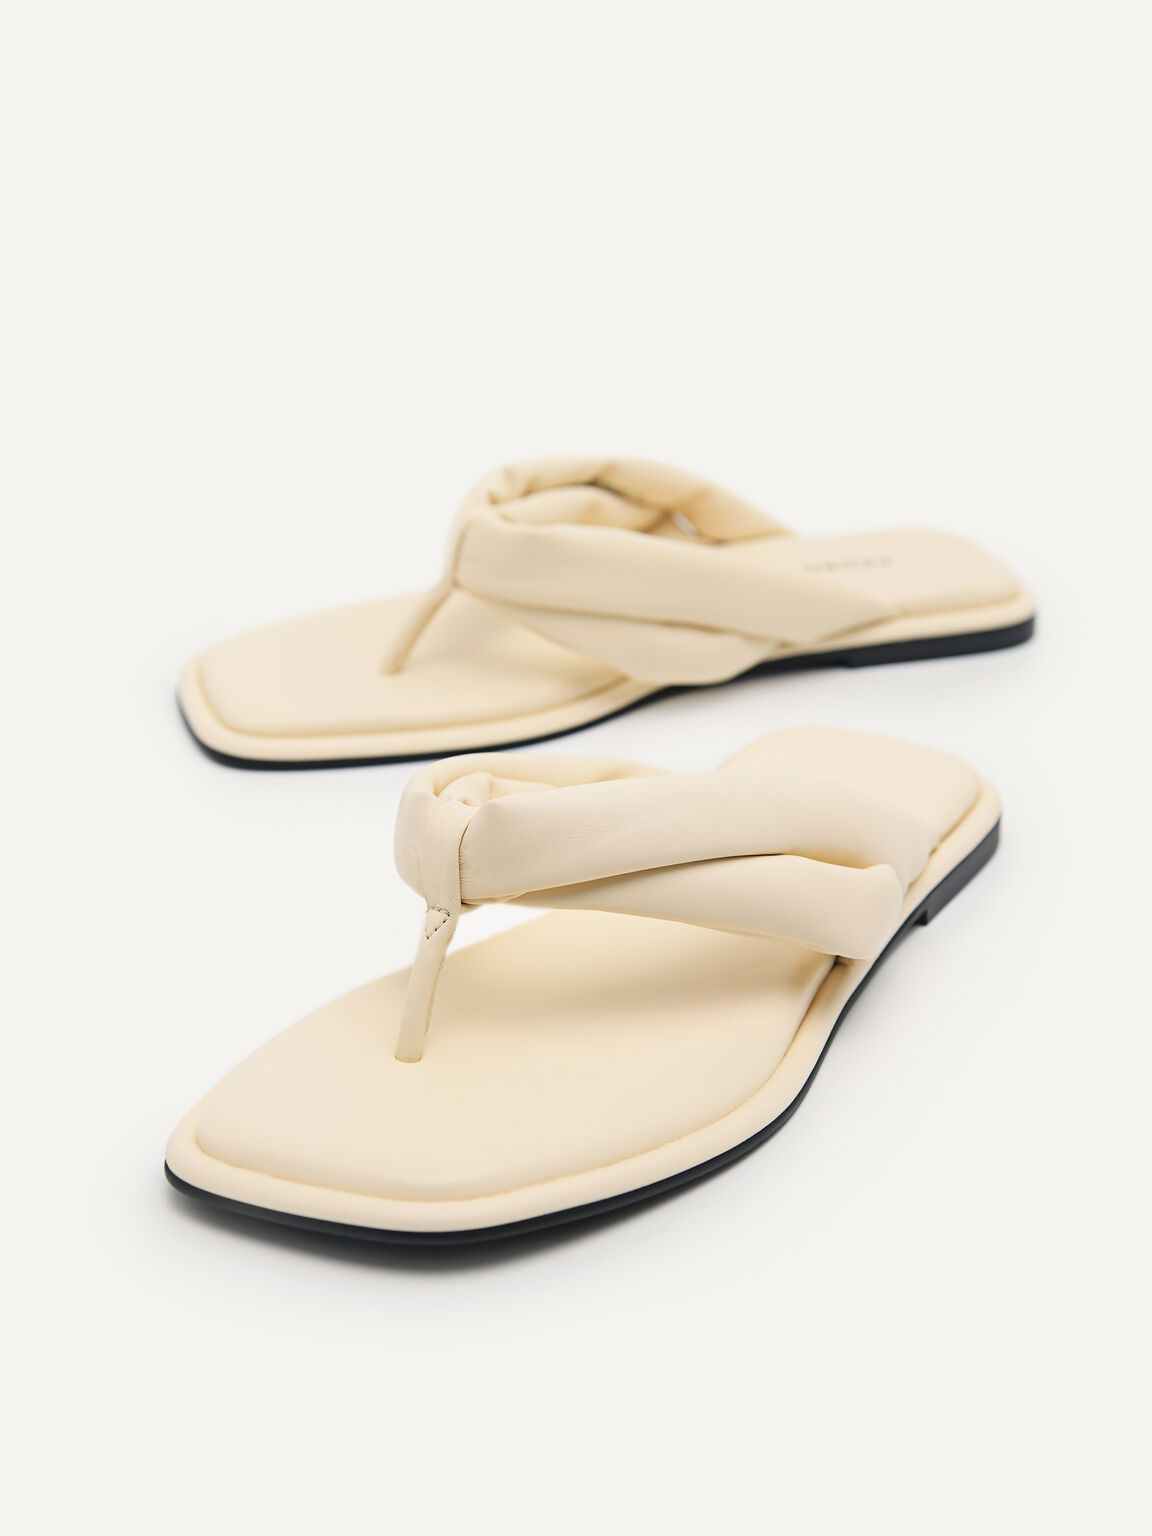 Padded Sandals, Beige